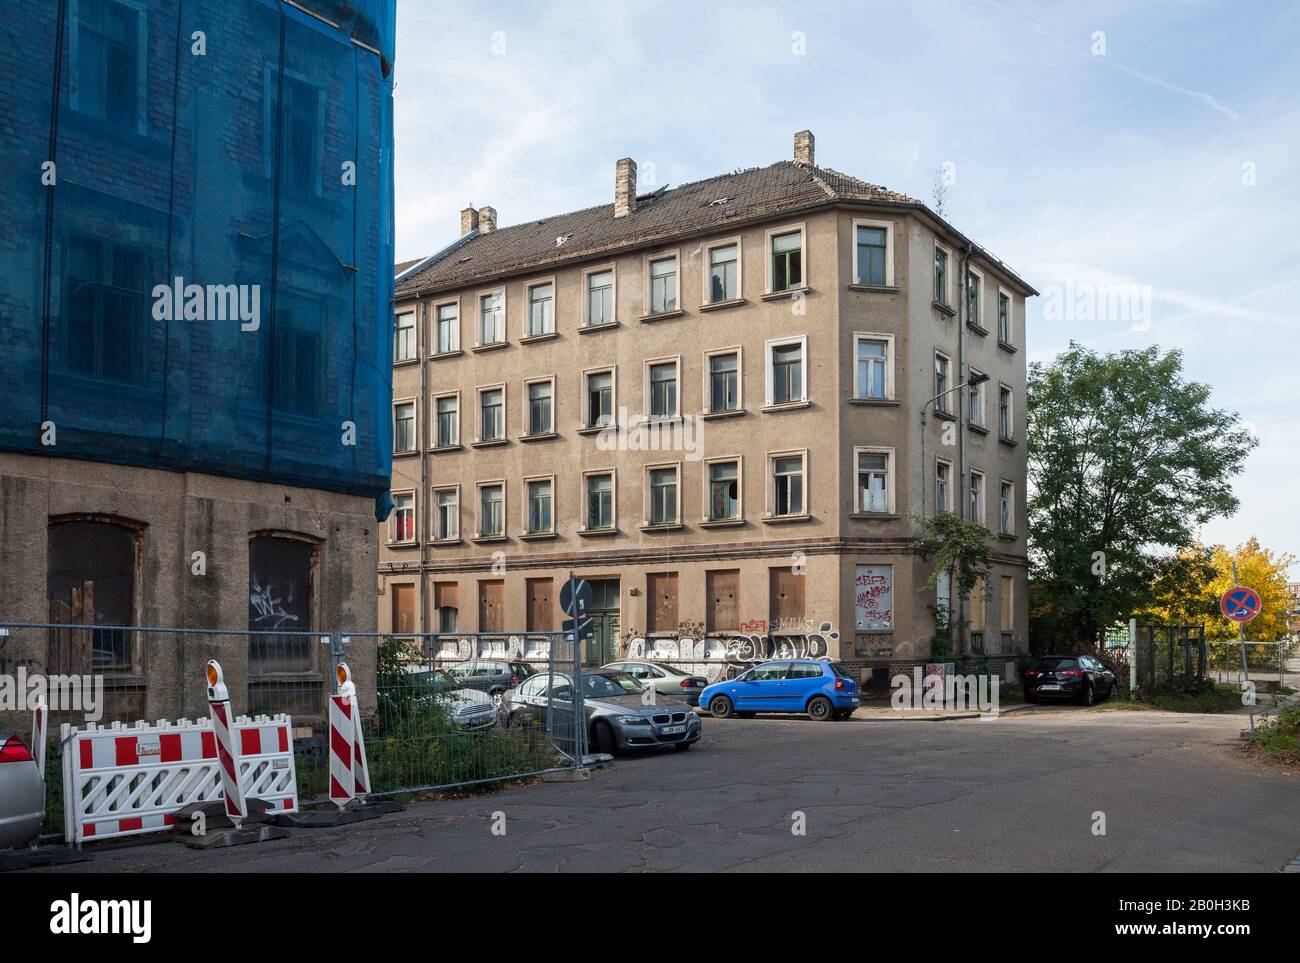 06.10.2018, Leipzig, Saxony, Germany - Run-down old buildings in Ruststrasse at the corner of Eythraer Strasse in Leipzig-Plagwitz. 00P181006D105CAROE Stock Photo